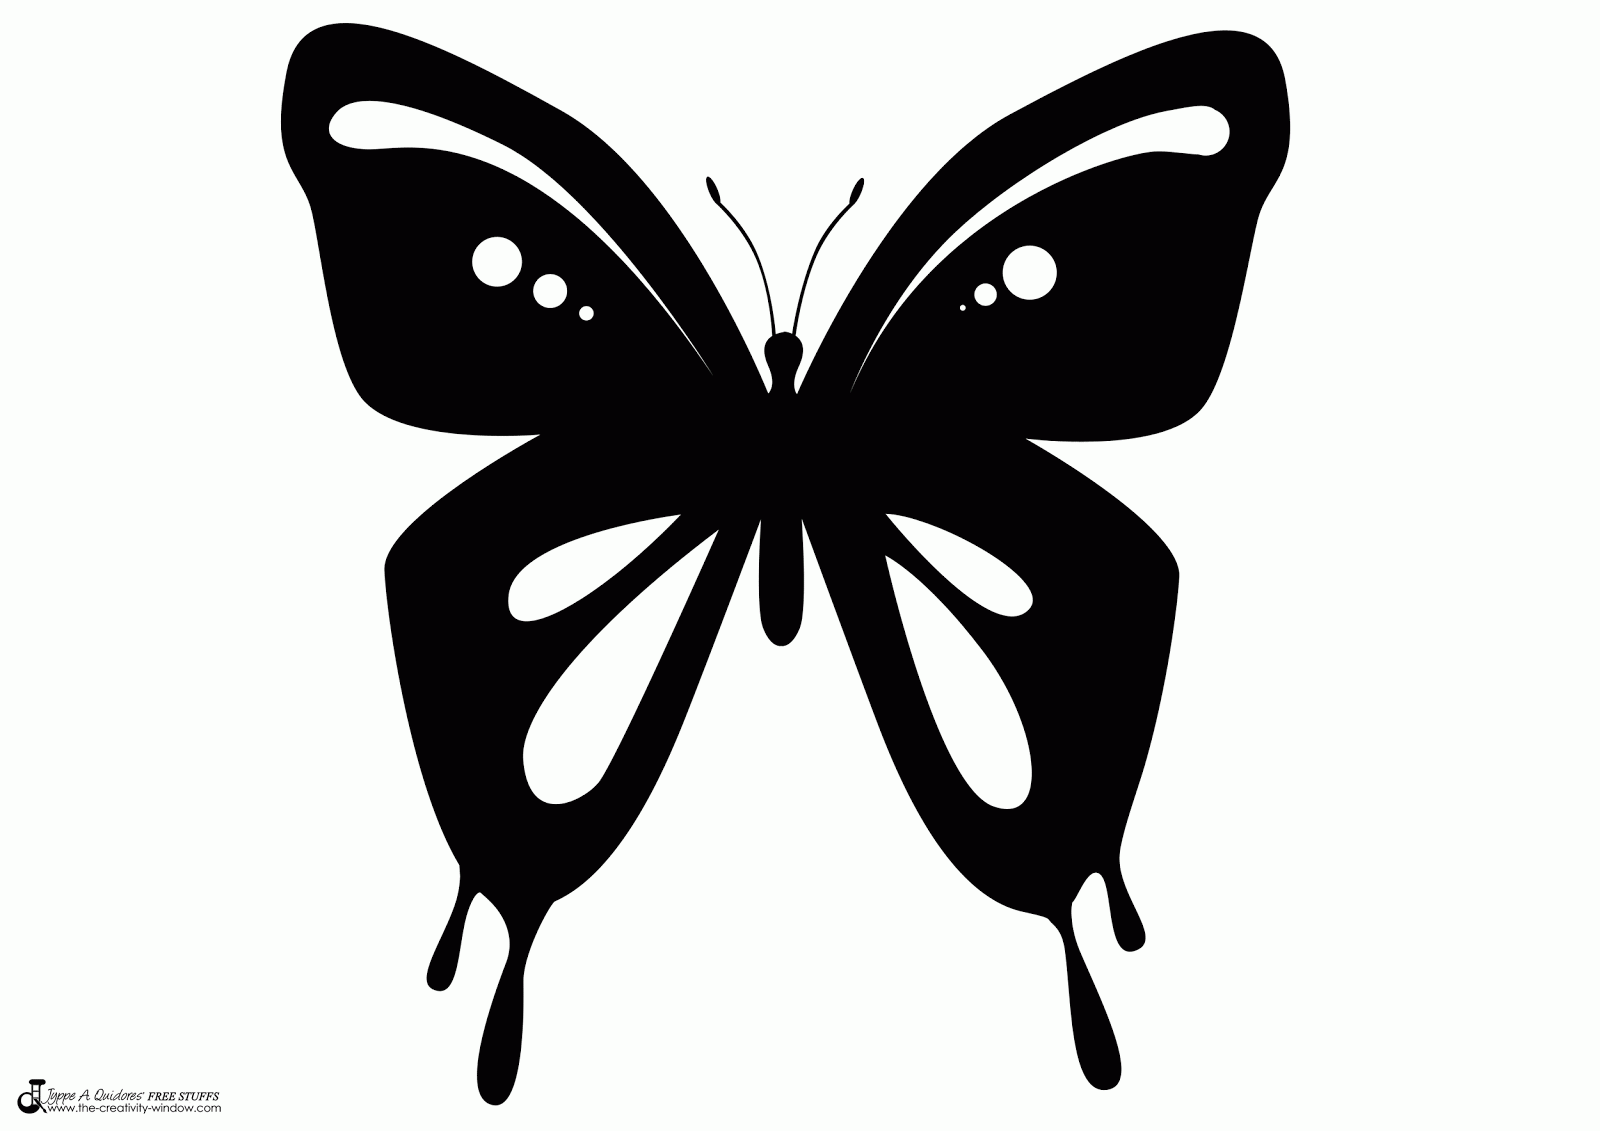 Free Butterfly Silhouette, Download Free Butterfly Silhouette png